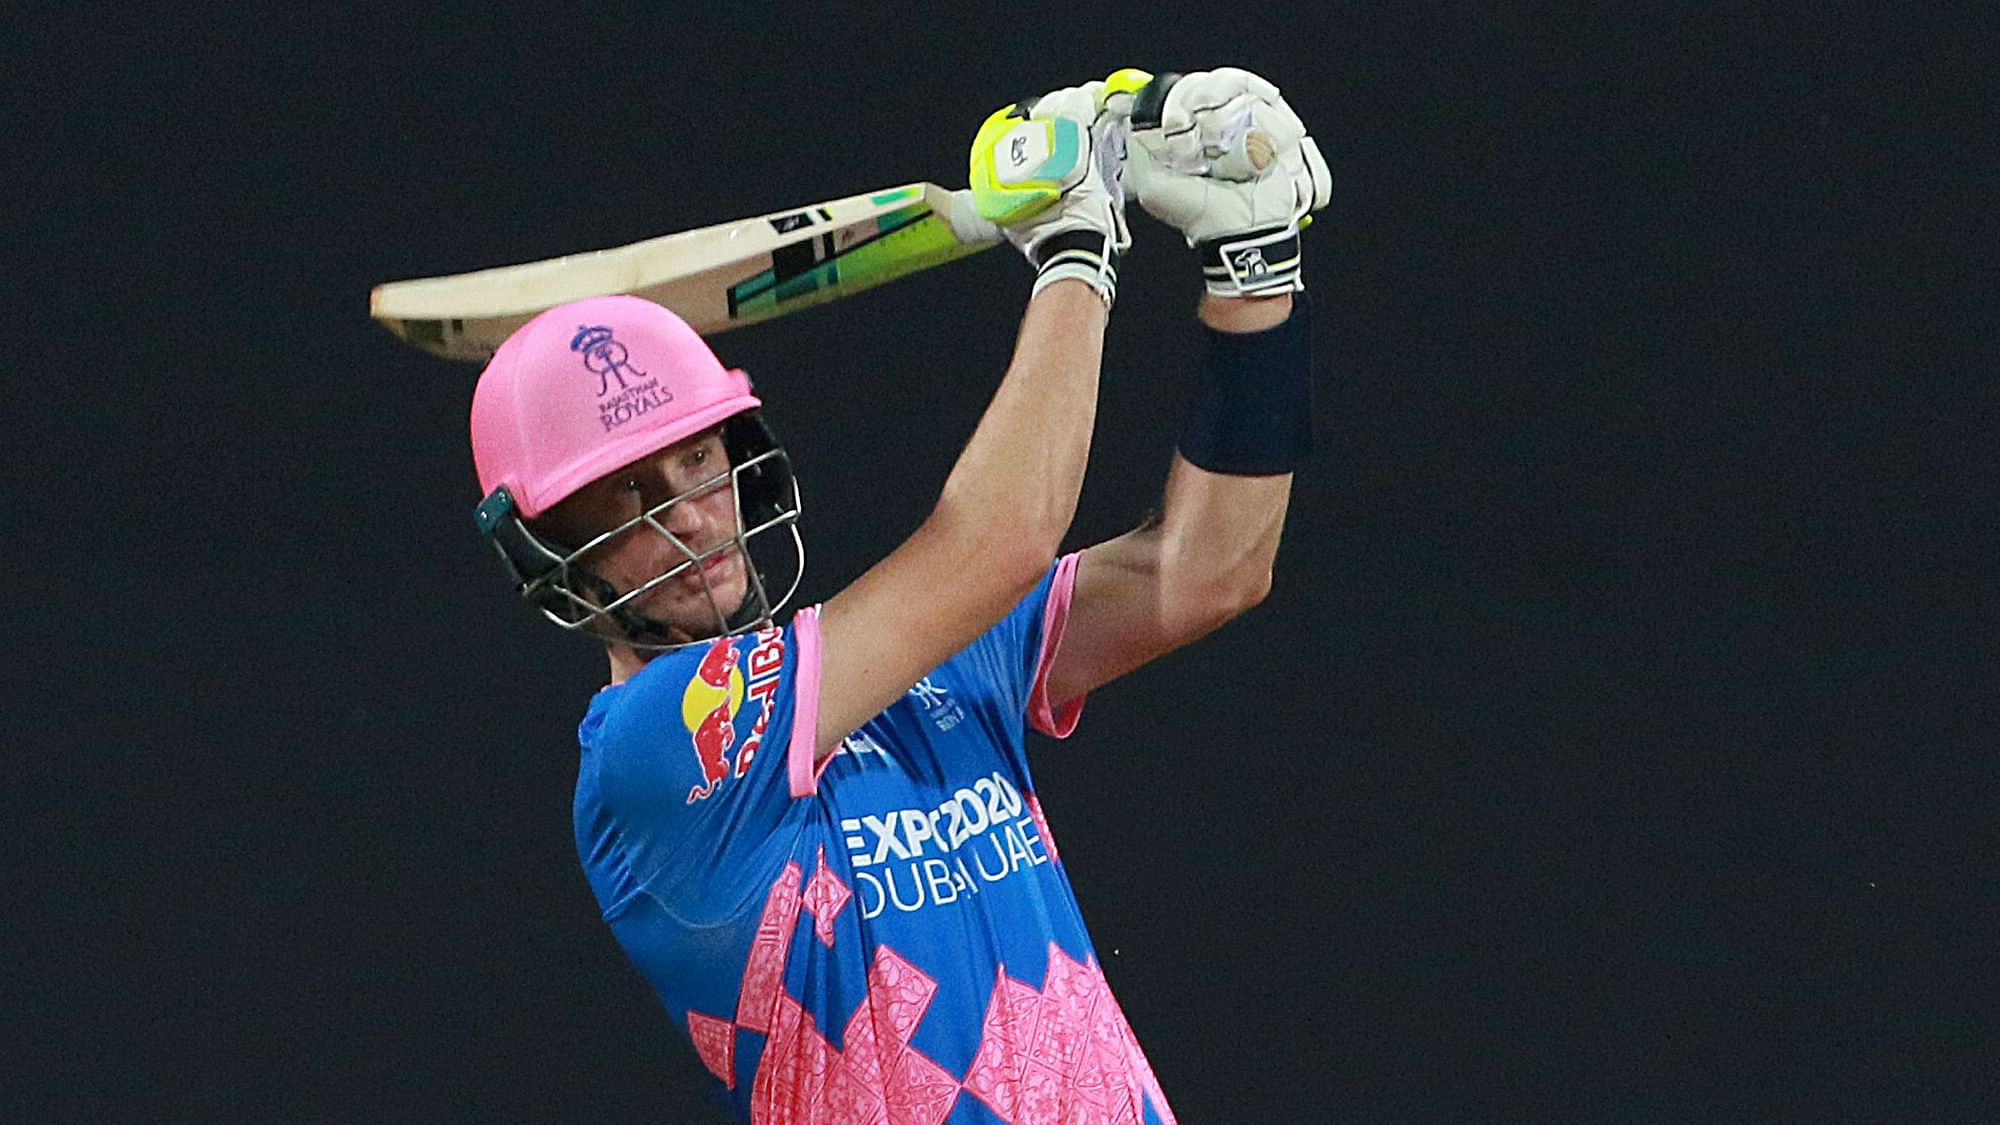 Rajasthan Royals beat Delhi Capitals by 3 wickets on Thursday night in the IPL.